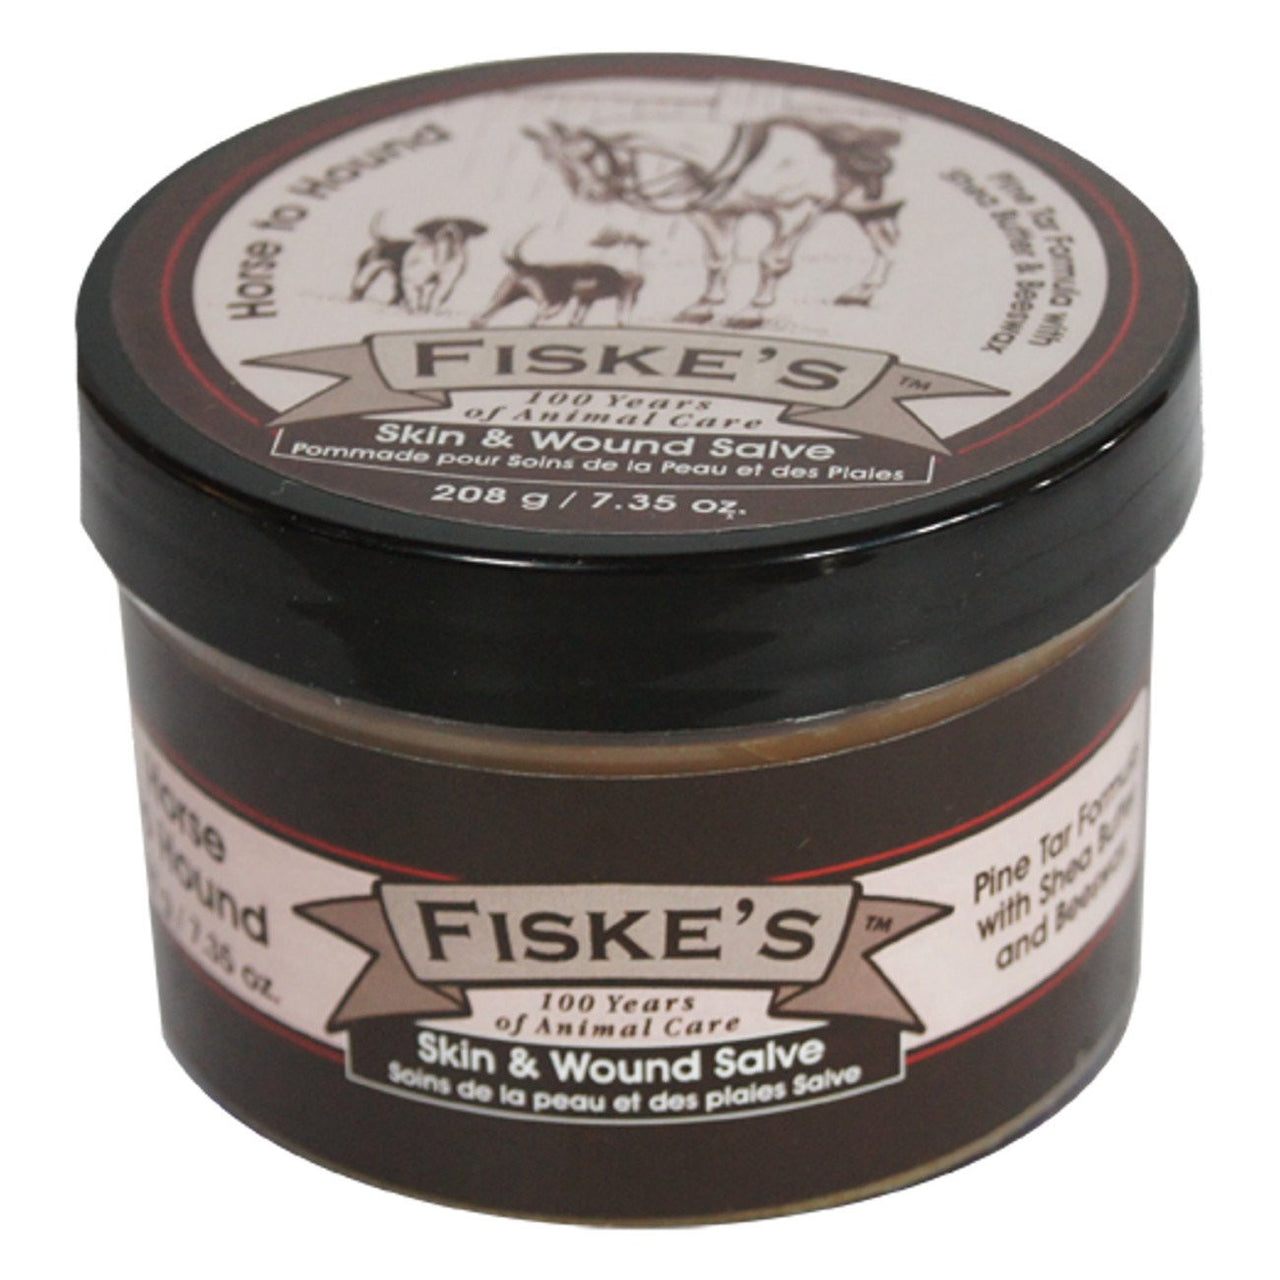 Fiskes Skin And Wound Salve 208 G - Equine Supplements Fiskes - Canada